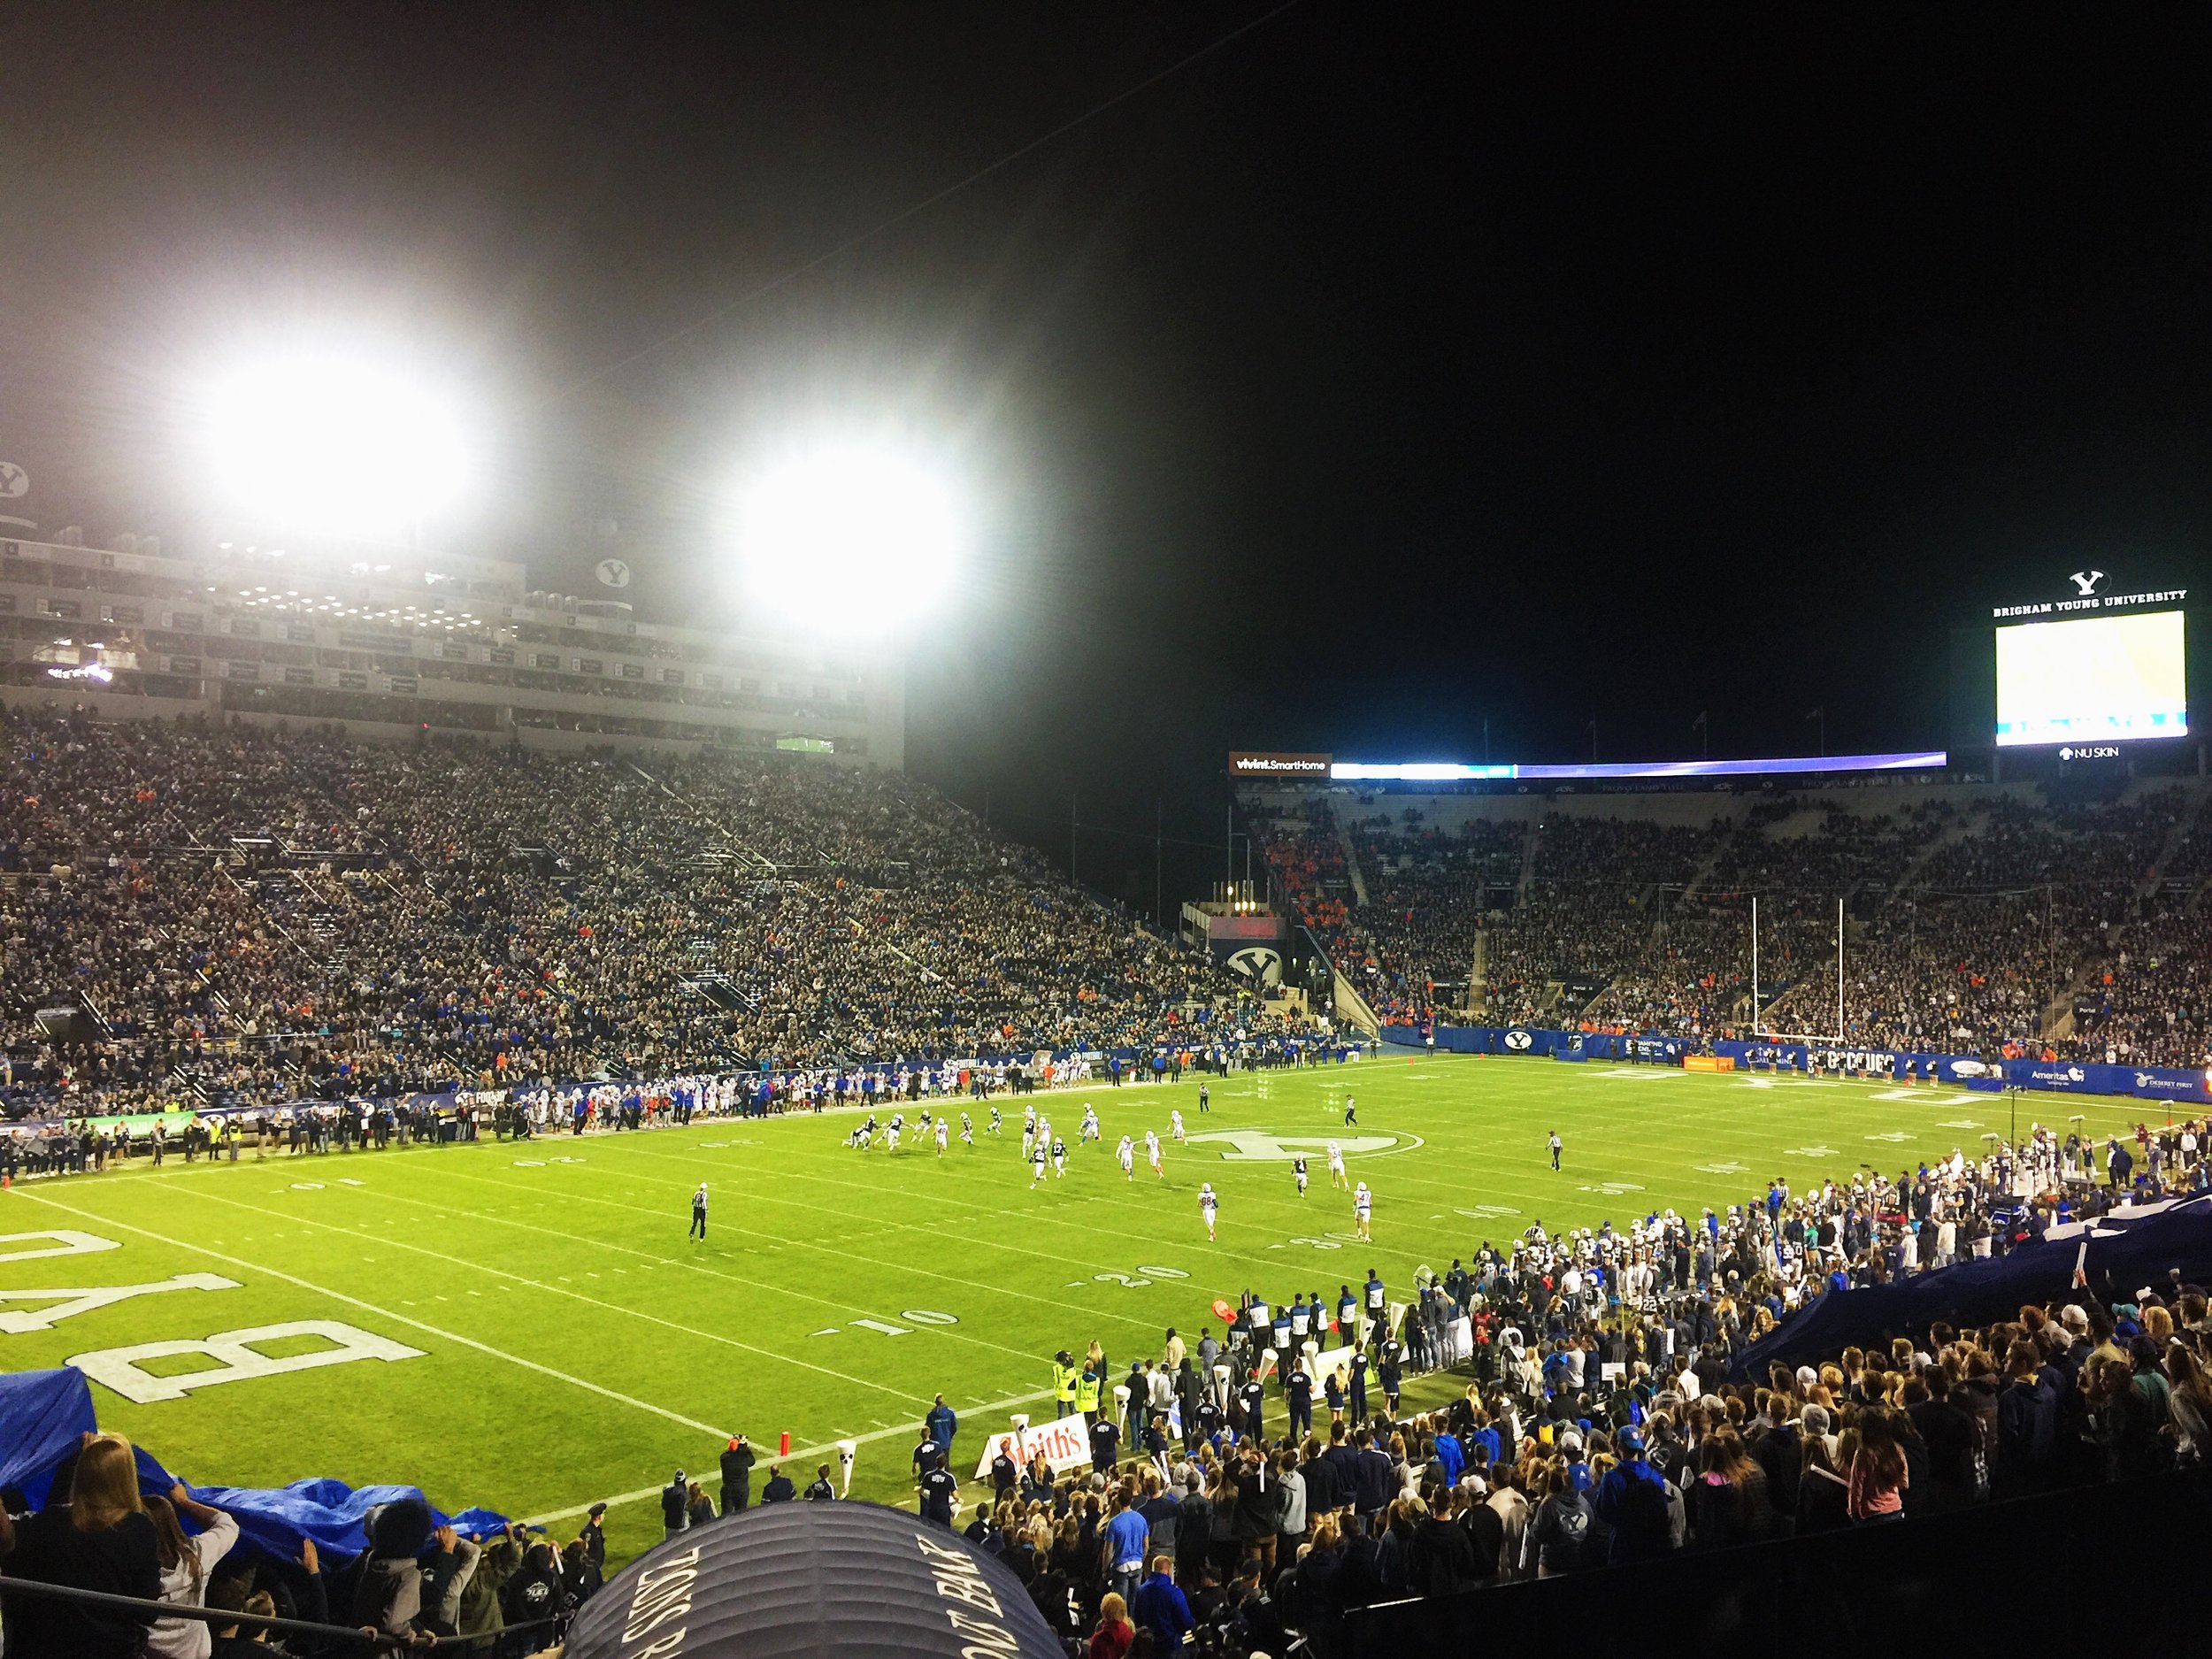 witnessed a BYU football game...